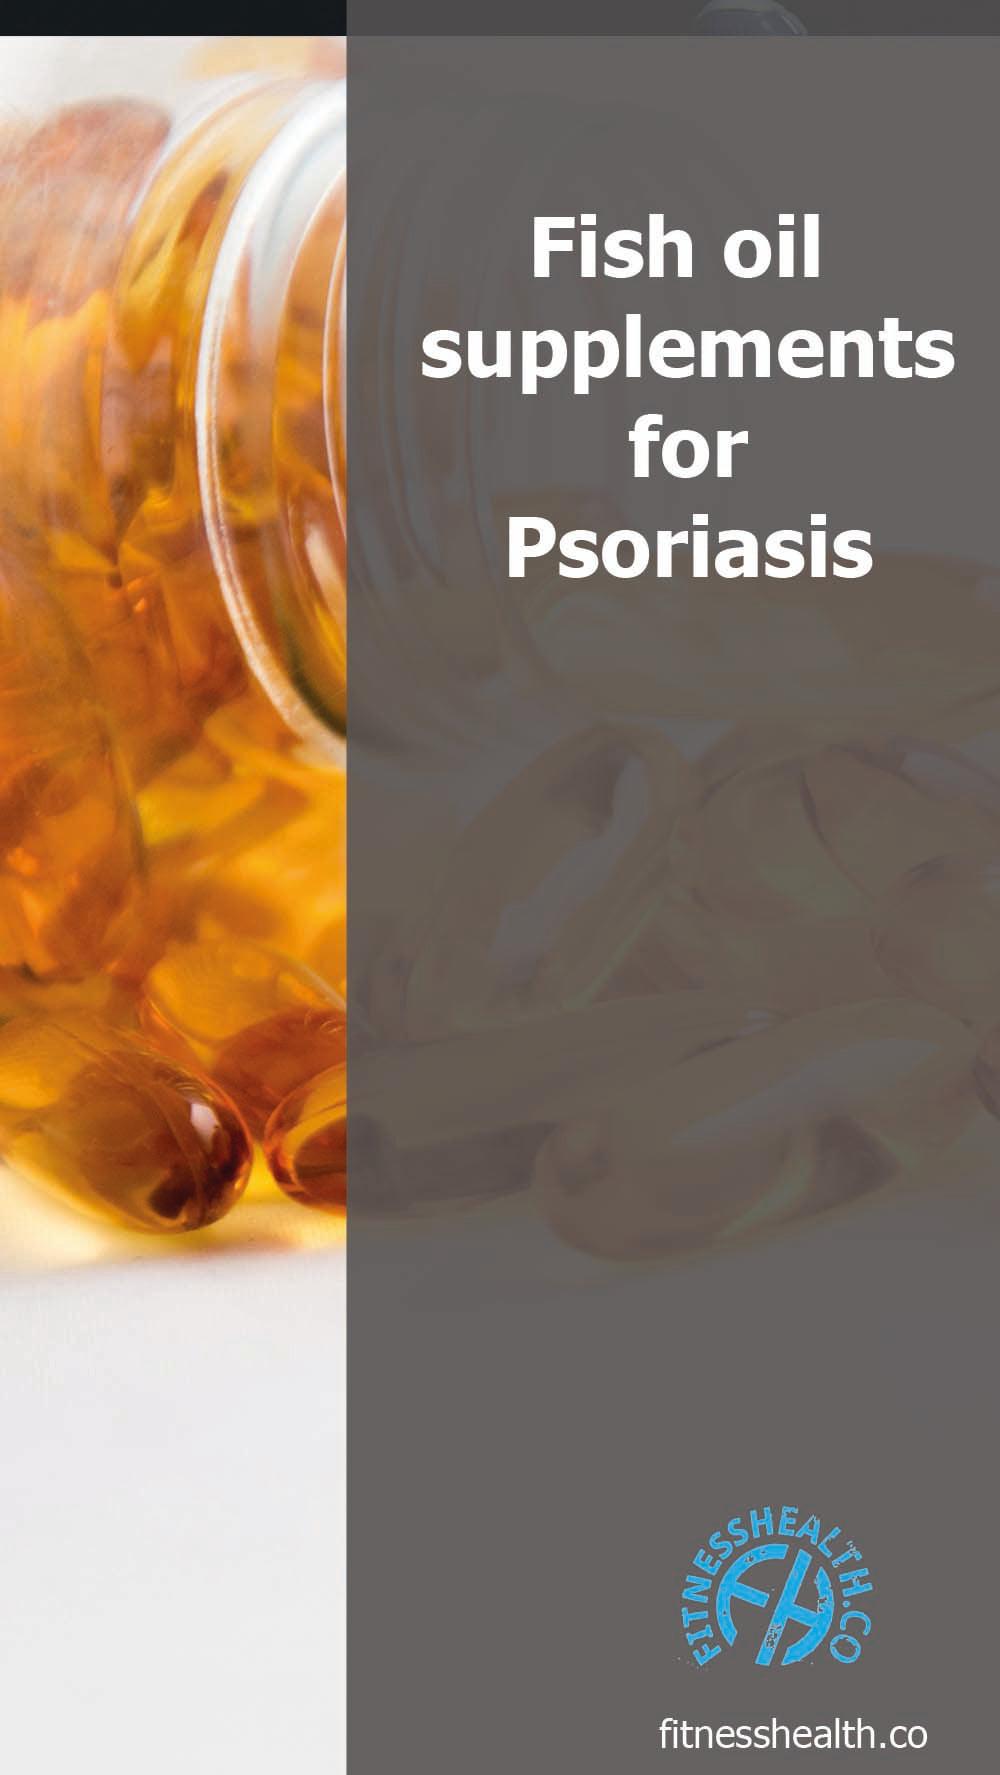 Fish oil supplements for Psoriasis